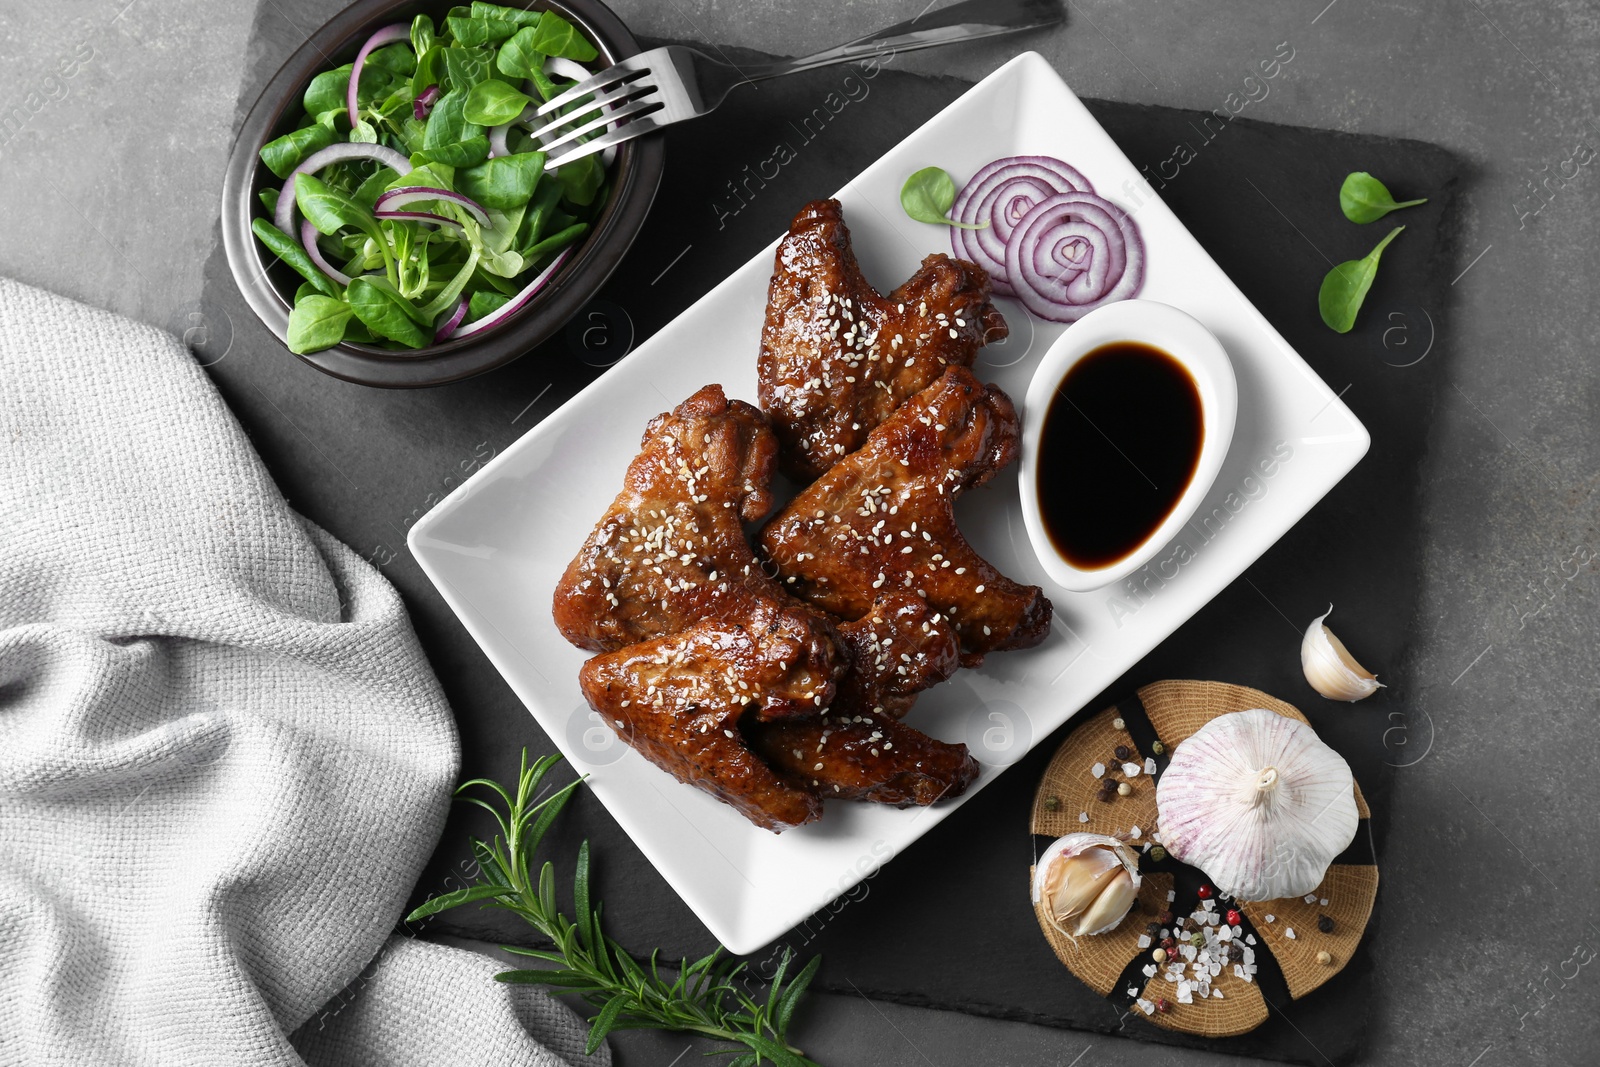 Photo of Chicken wings glazed with soy sauce served on grey table, flat lay